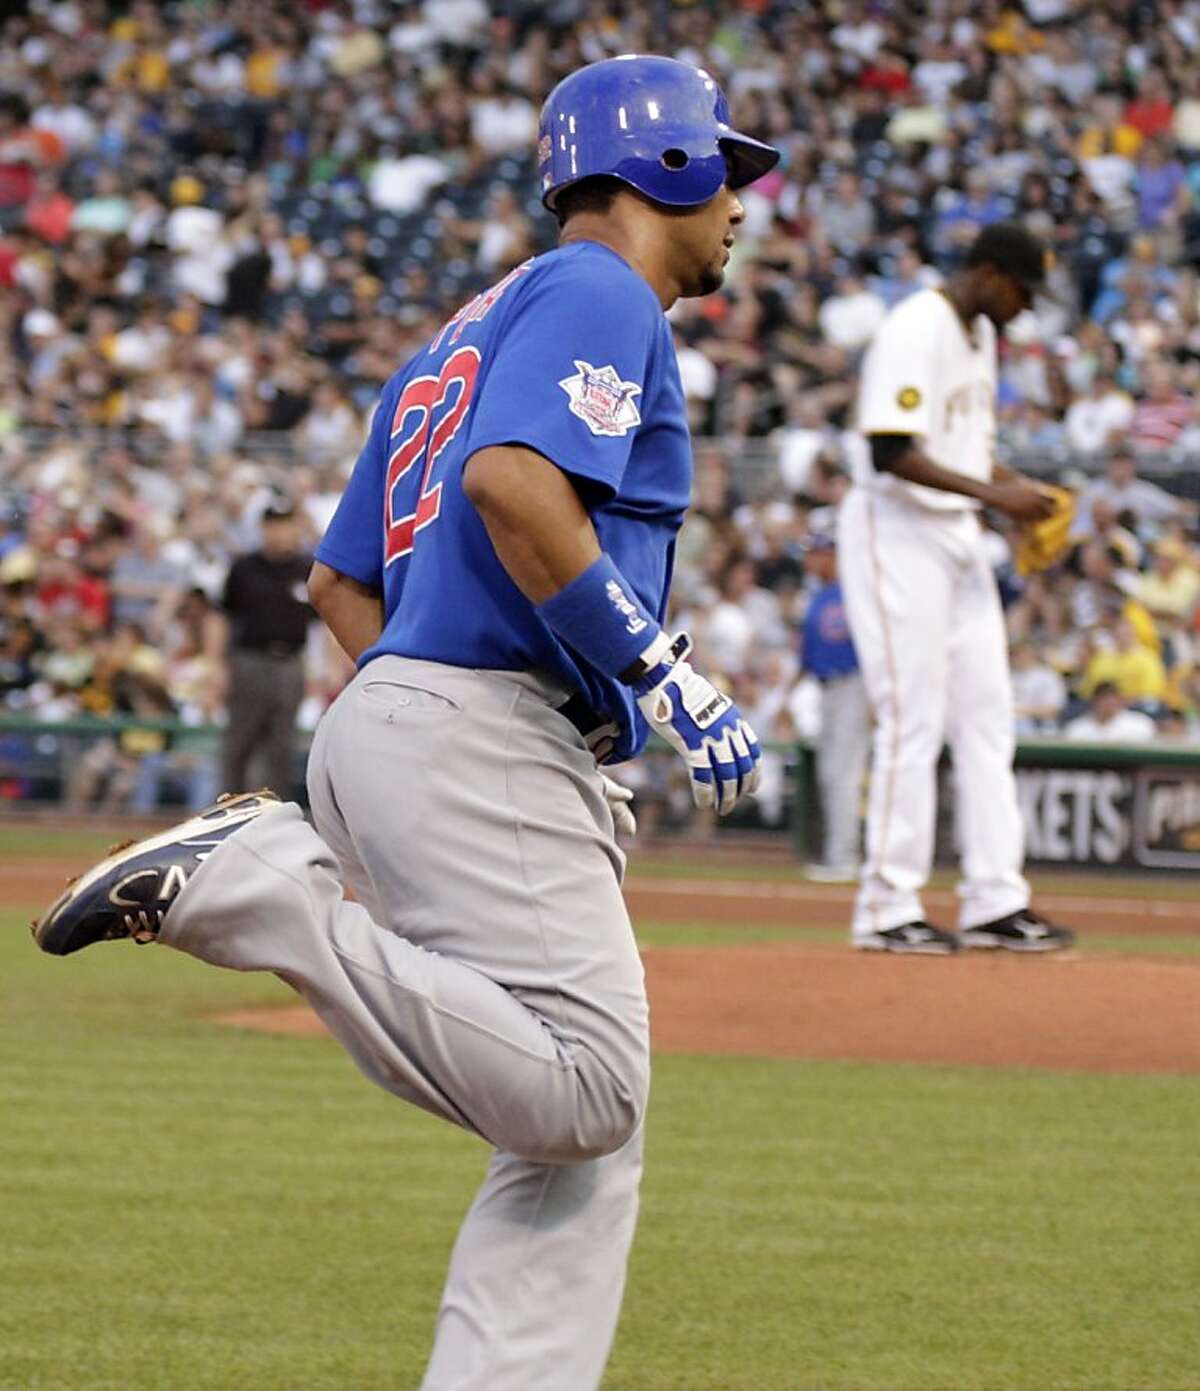 Chicago Cubs' Carlos Pena, left, rounds third after hitting a two-run home run off Pittsburgh Pirates pitcher James McDonald, right rear, in the fourth inning of a baseball game Thursday, Aug. 4, 2011, in Pittsburgh.